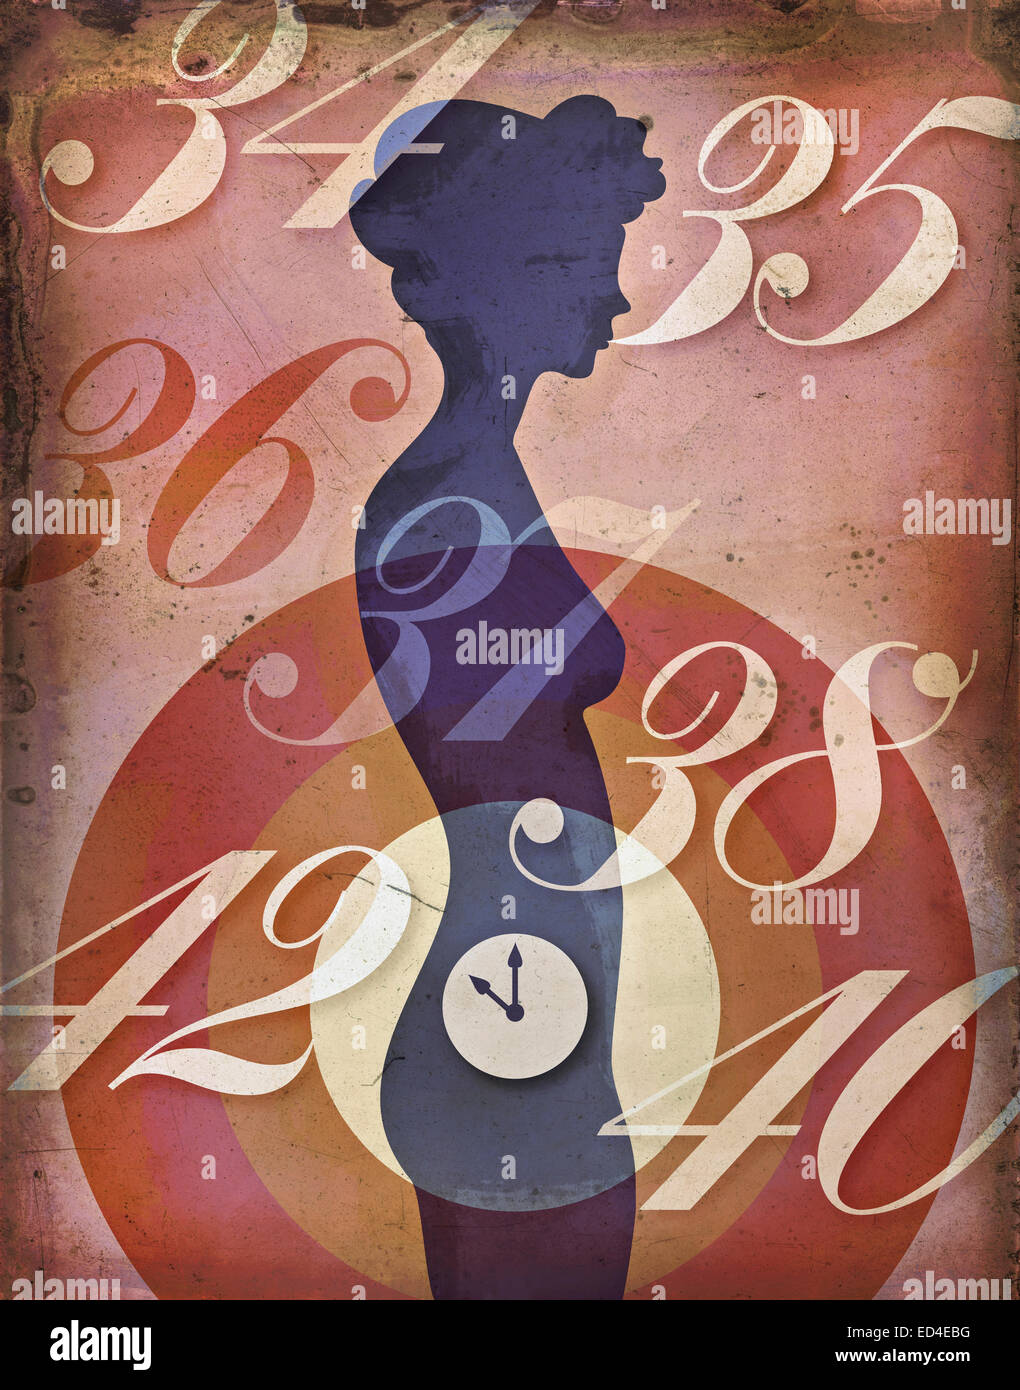 Woman's Biological Clock concept. Retro poster style illustration of woman's silhouette with clock ticking away in her abdomen. Stock Photo